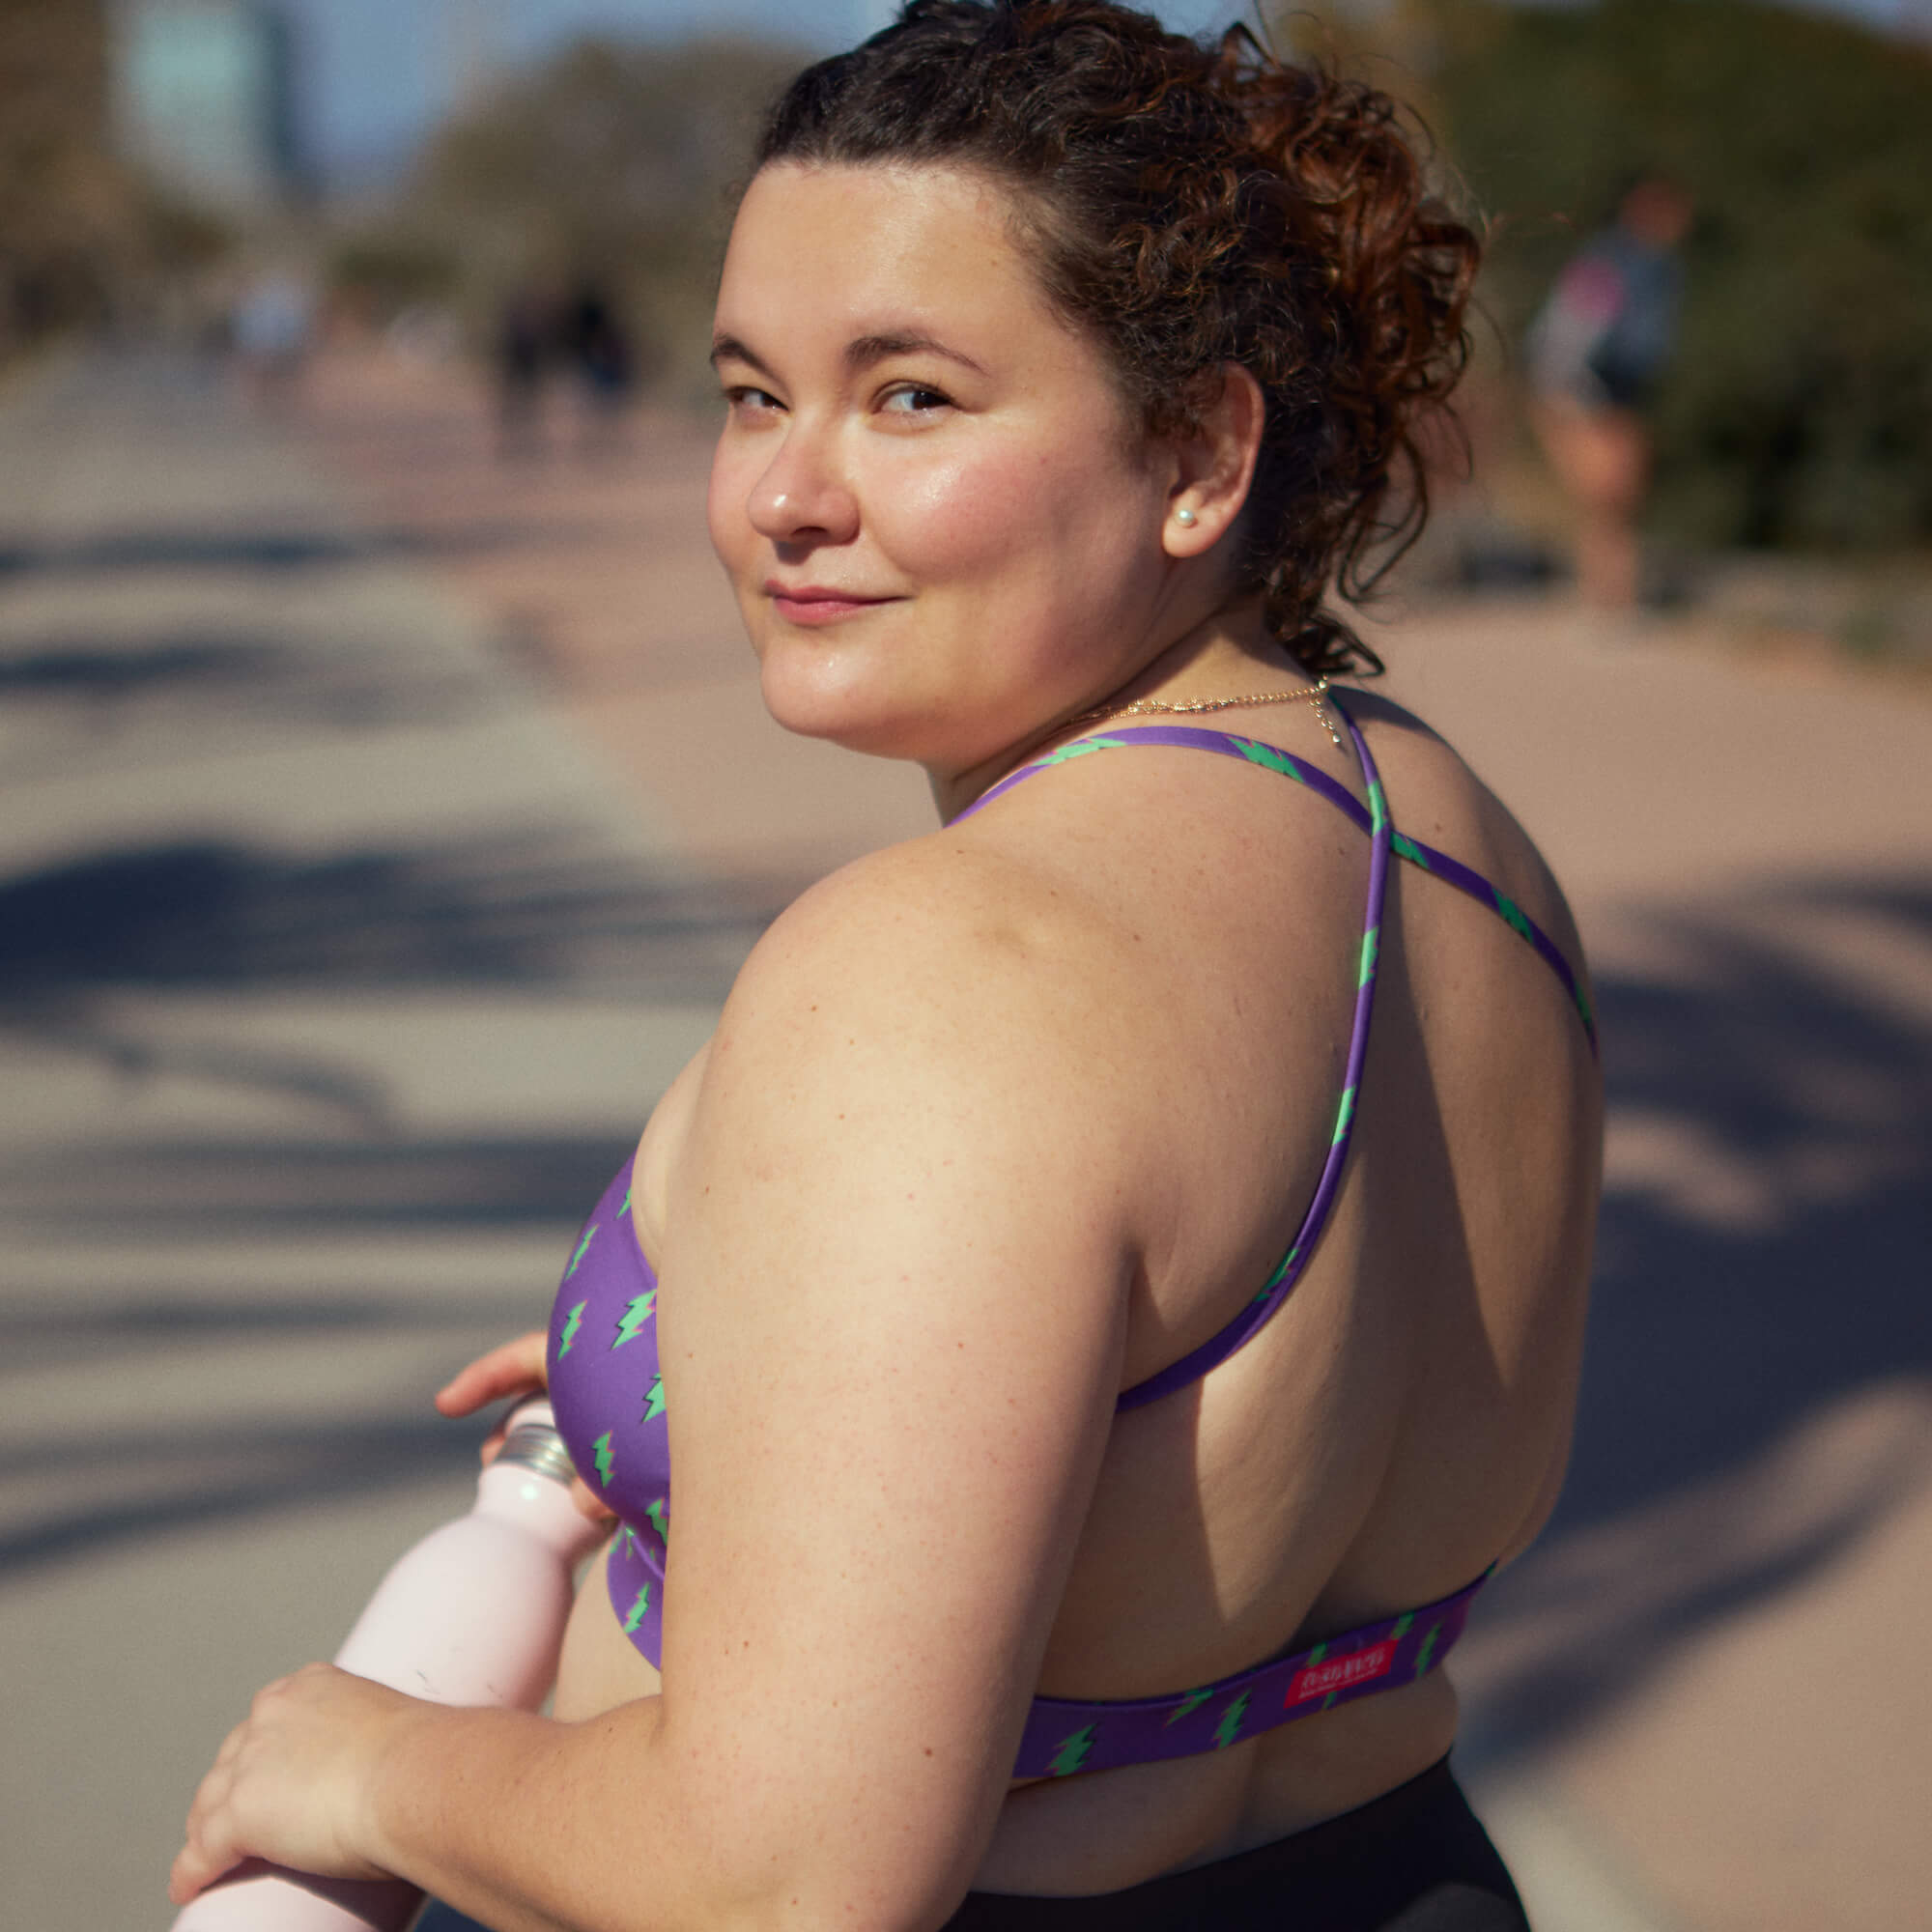 Woman looking back over her shoulder, wearing a lightning bolt sports bra in purple and holding a water bottle.